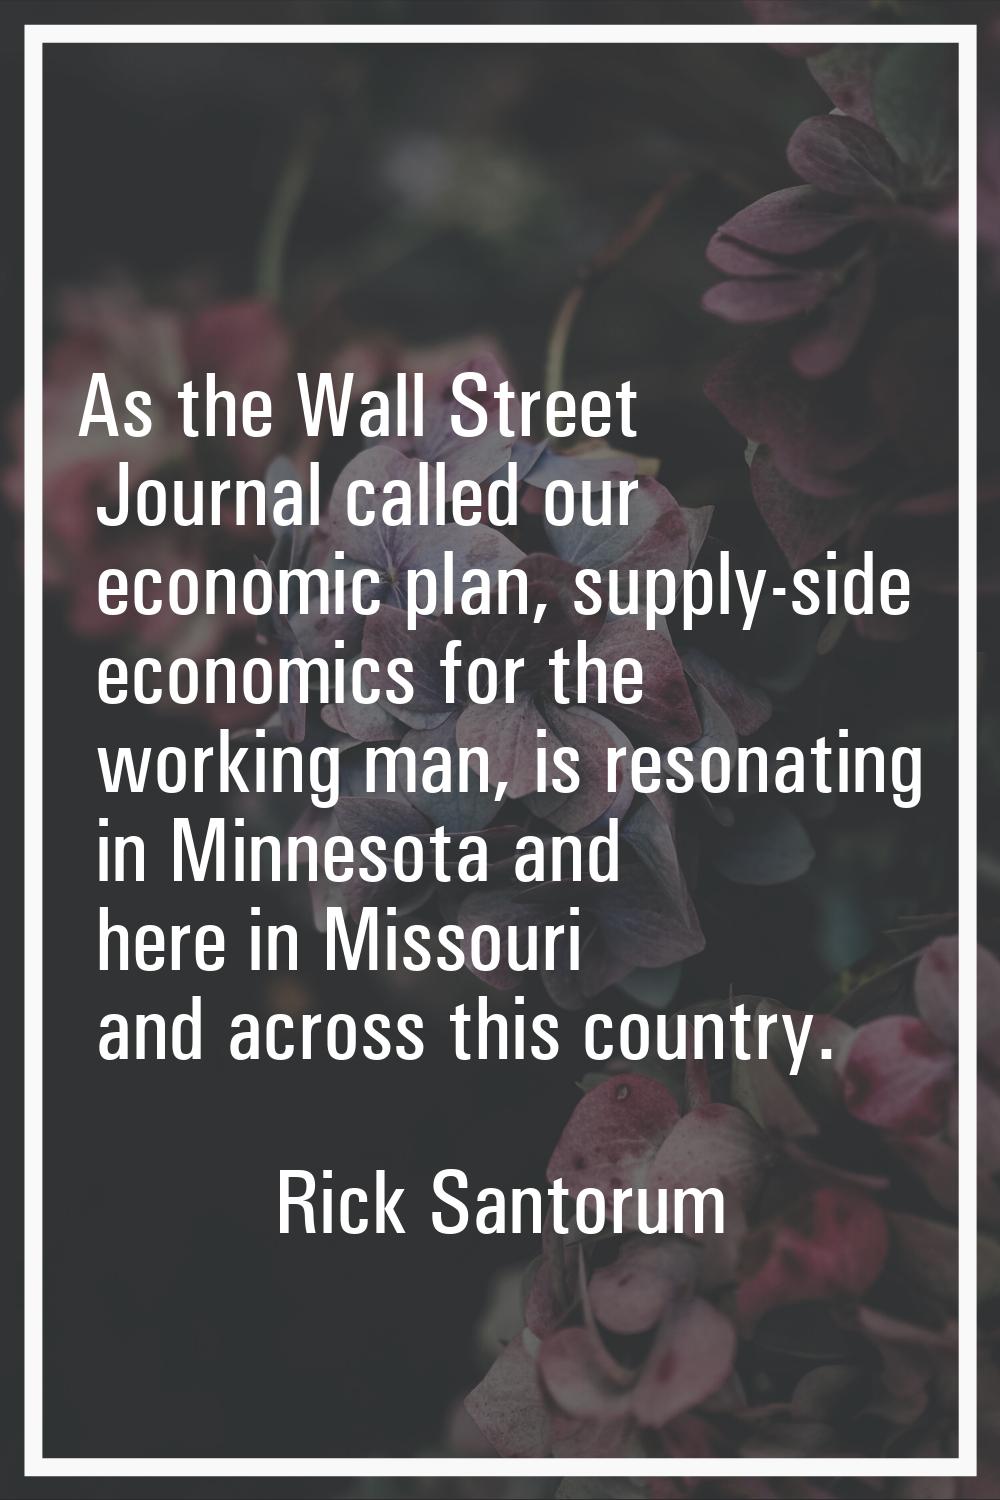 As the Wall Street Journal called our economic plan, supply-side economics for the working man, is 